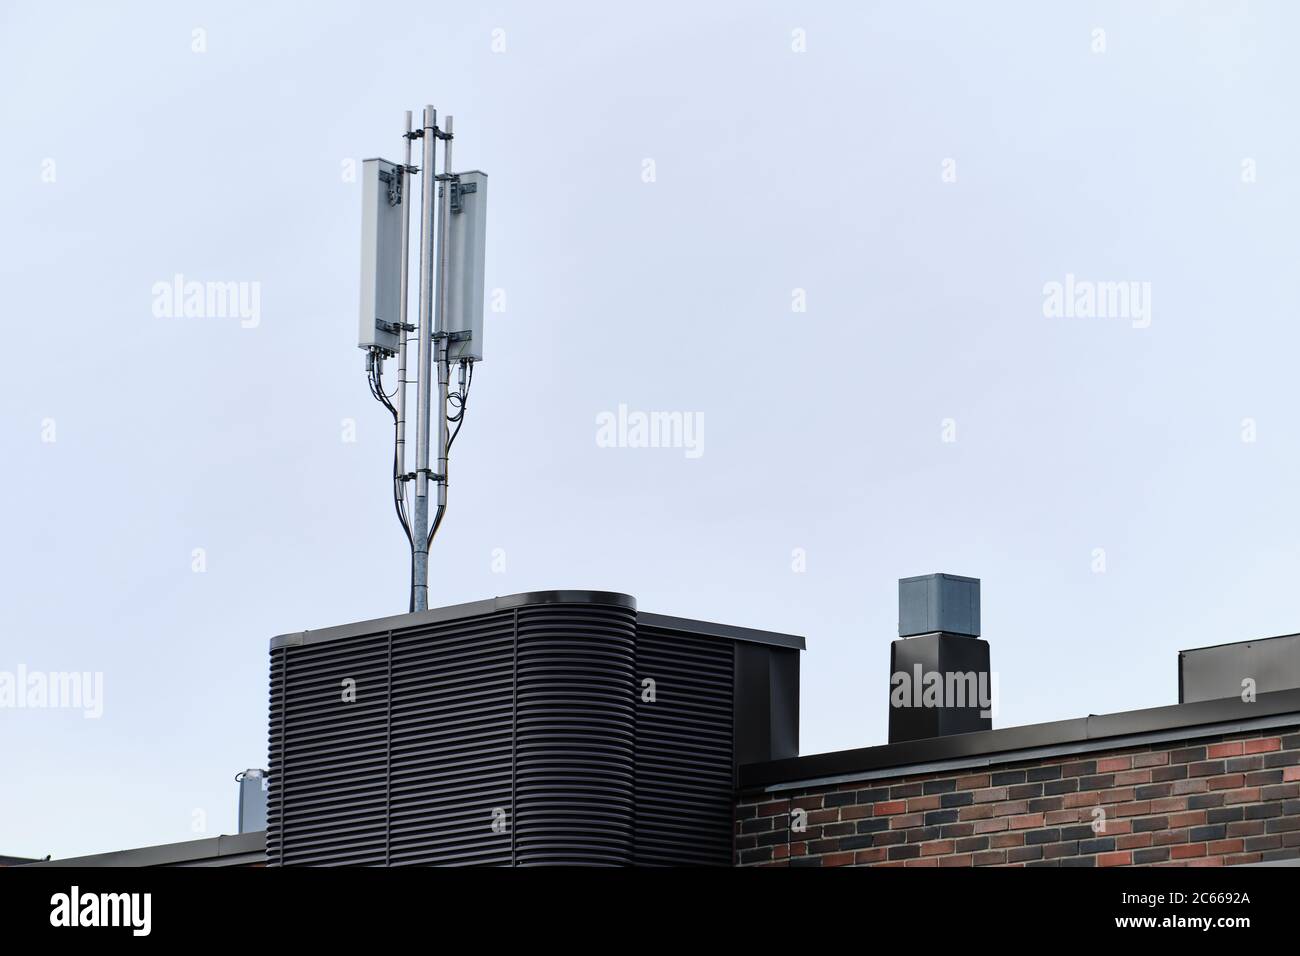 Cellular phone network telecommunication tower on the building roof. Stock Photo